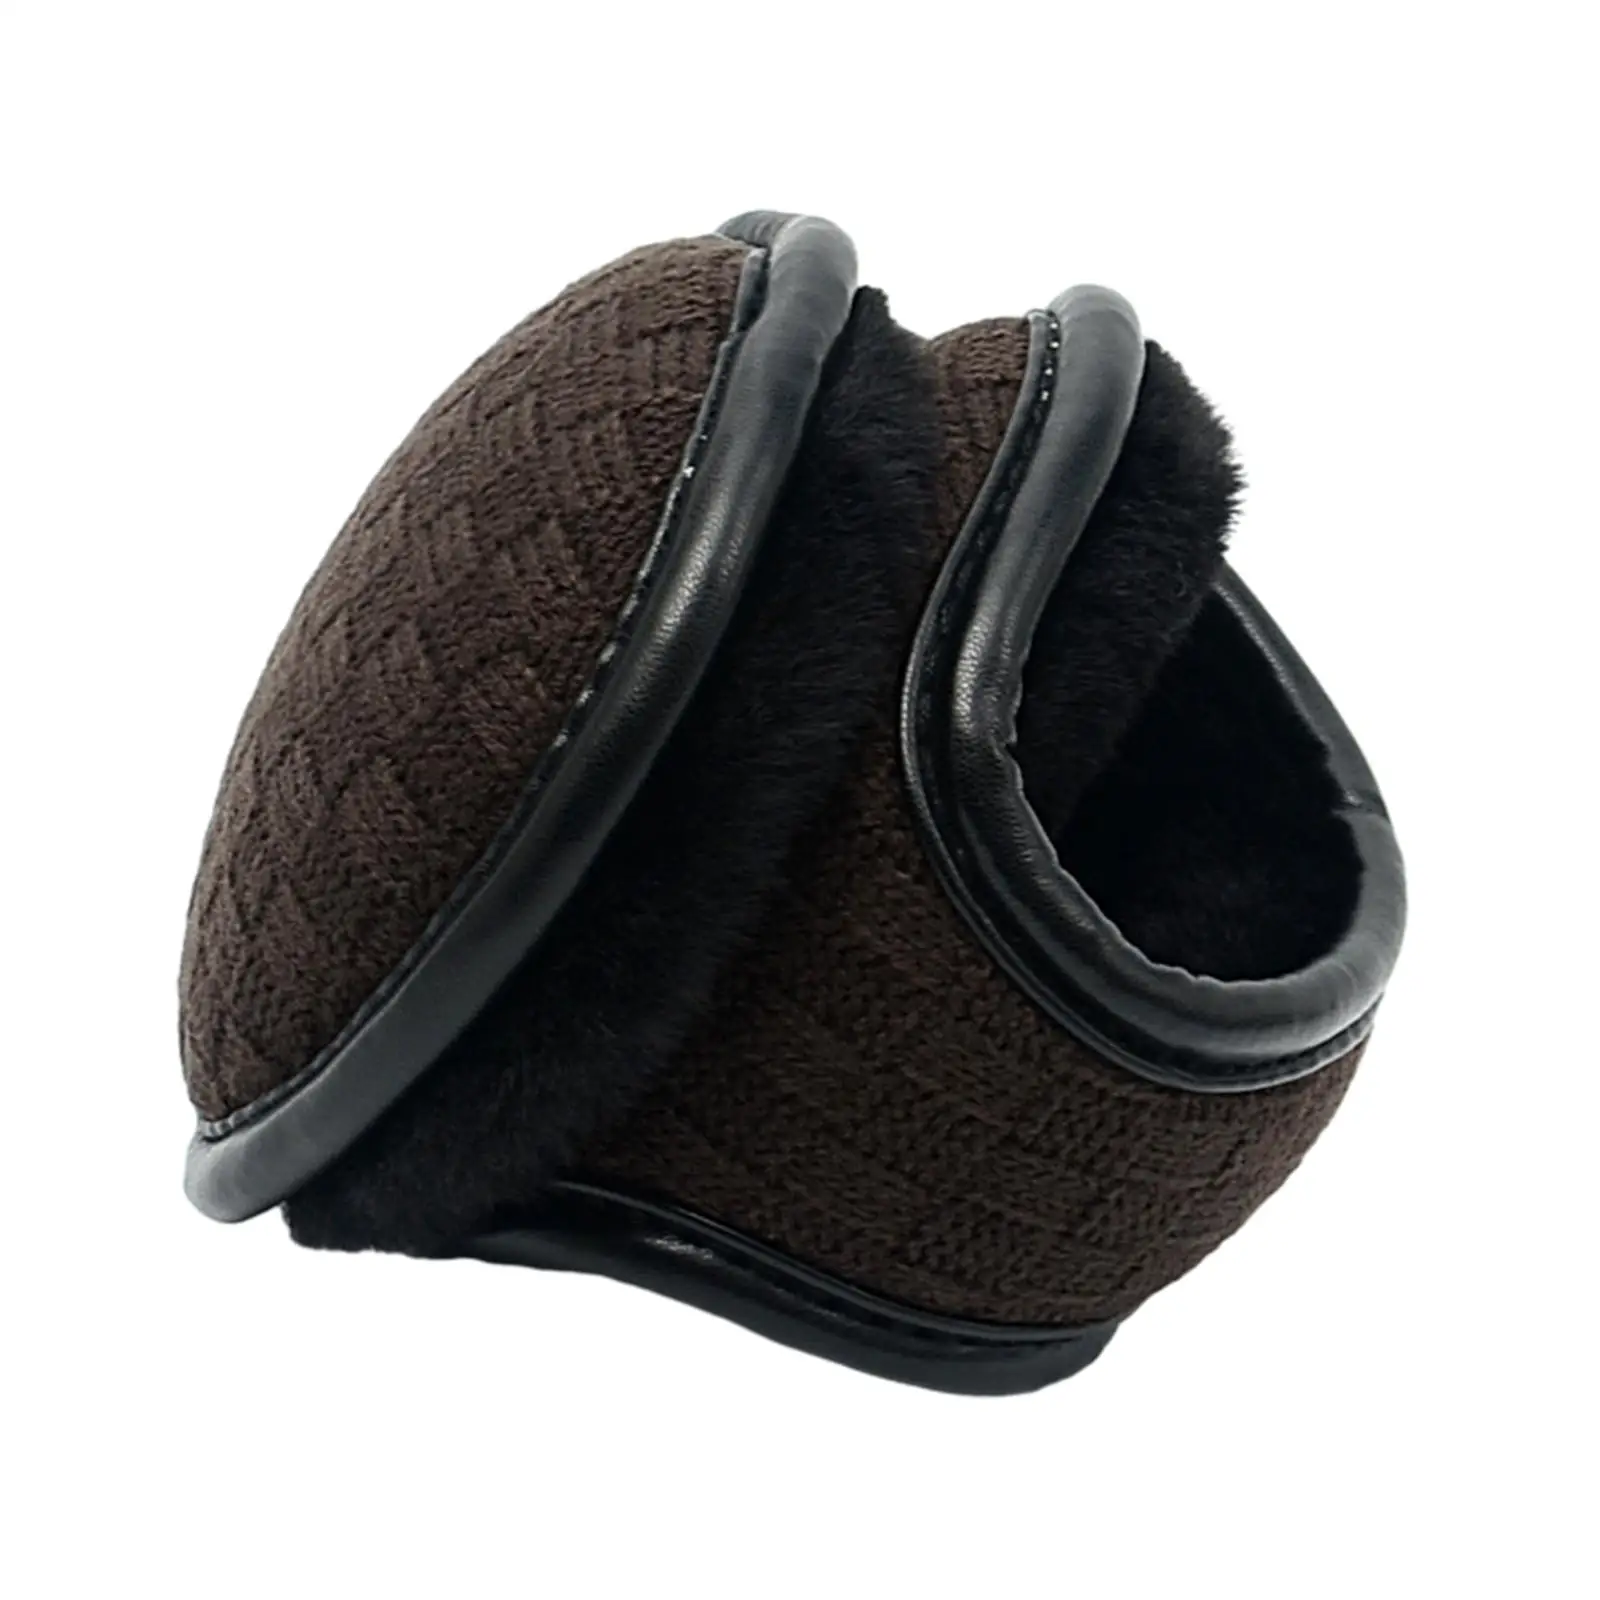 Ear Warmers for Cold Weather Foldable Earmuffs for Skating Traveling Cycling